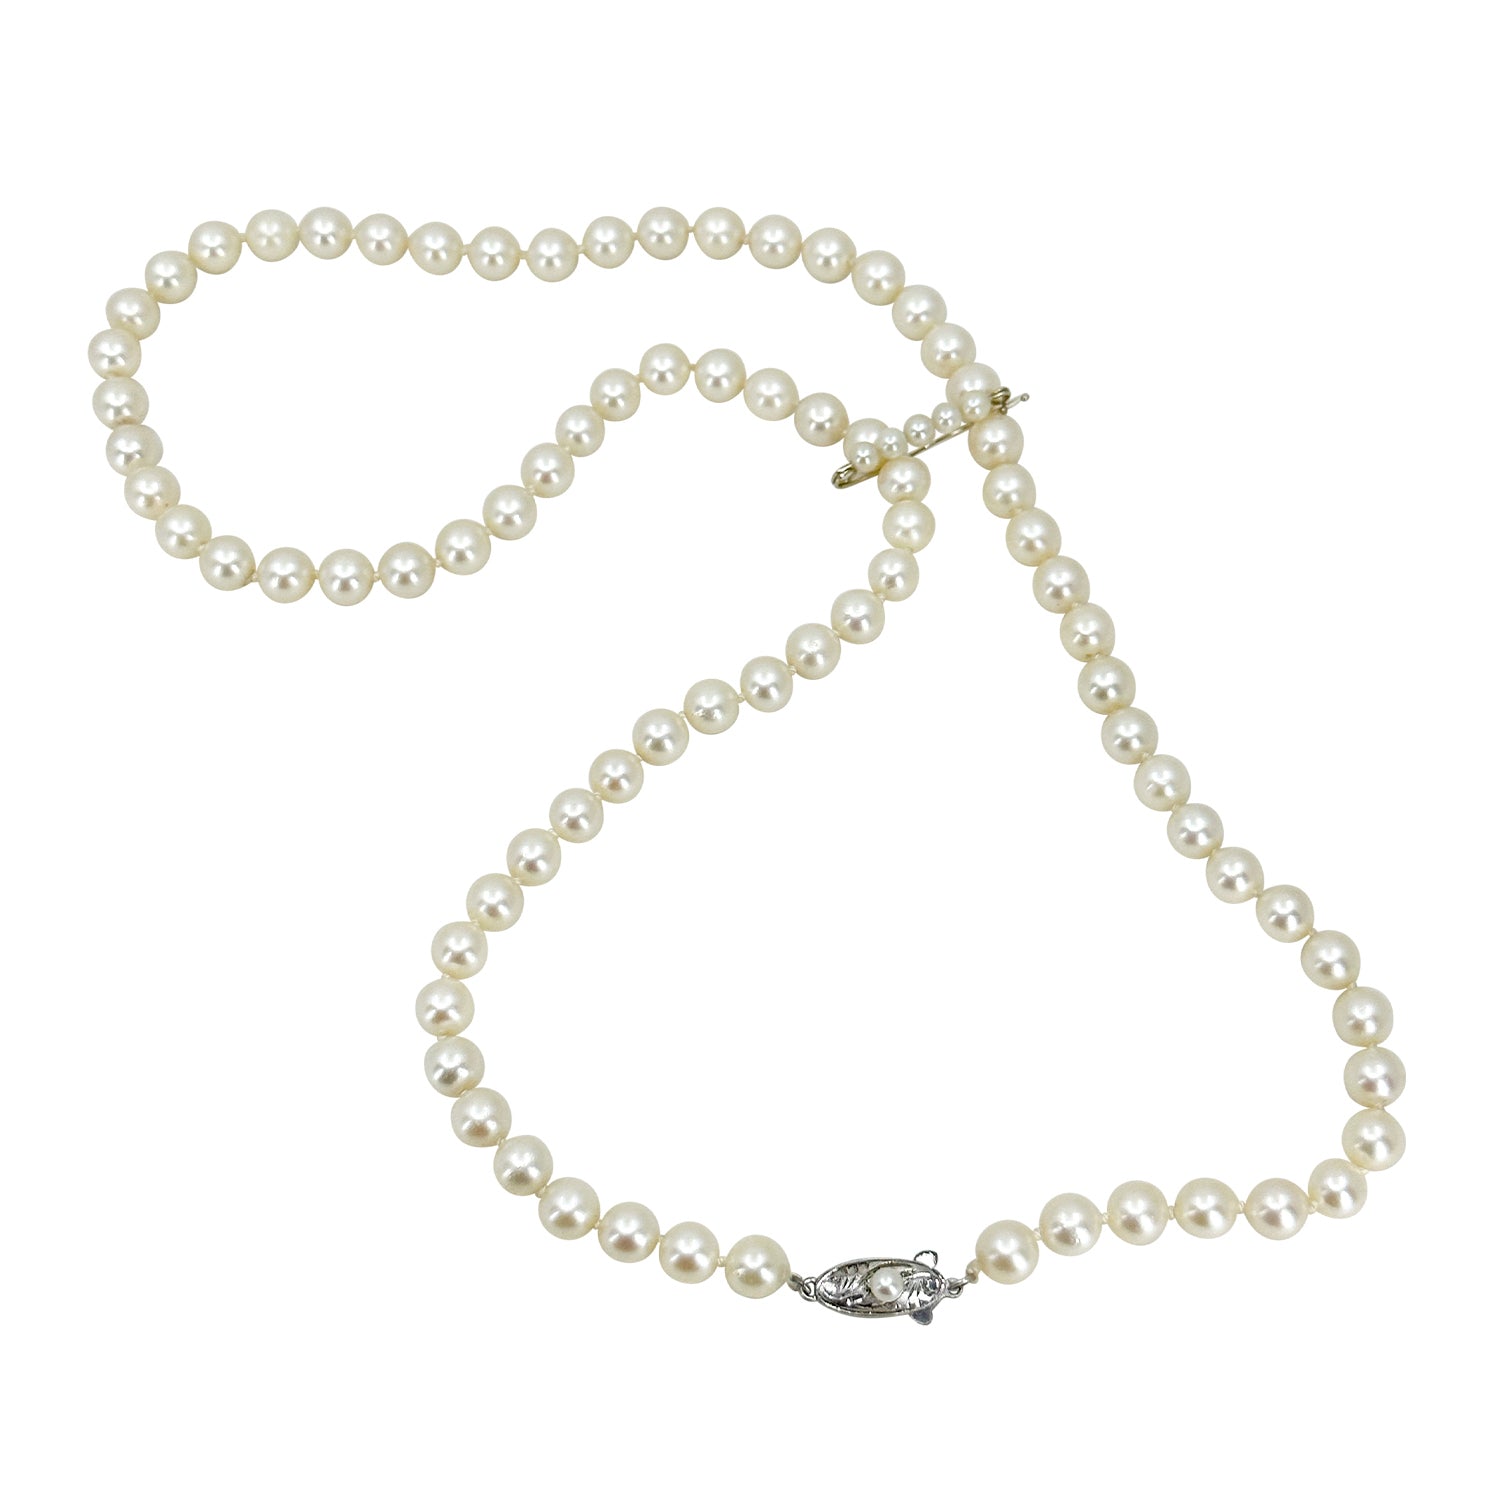 Matinee Vintage Japanese Saltwater Cultured Akoya Pearl Necklace Strand- Sterling Silver 24 Inch